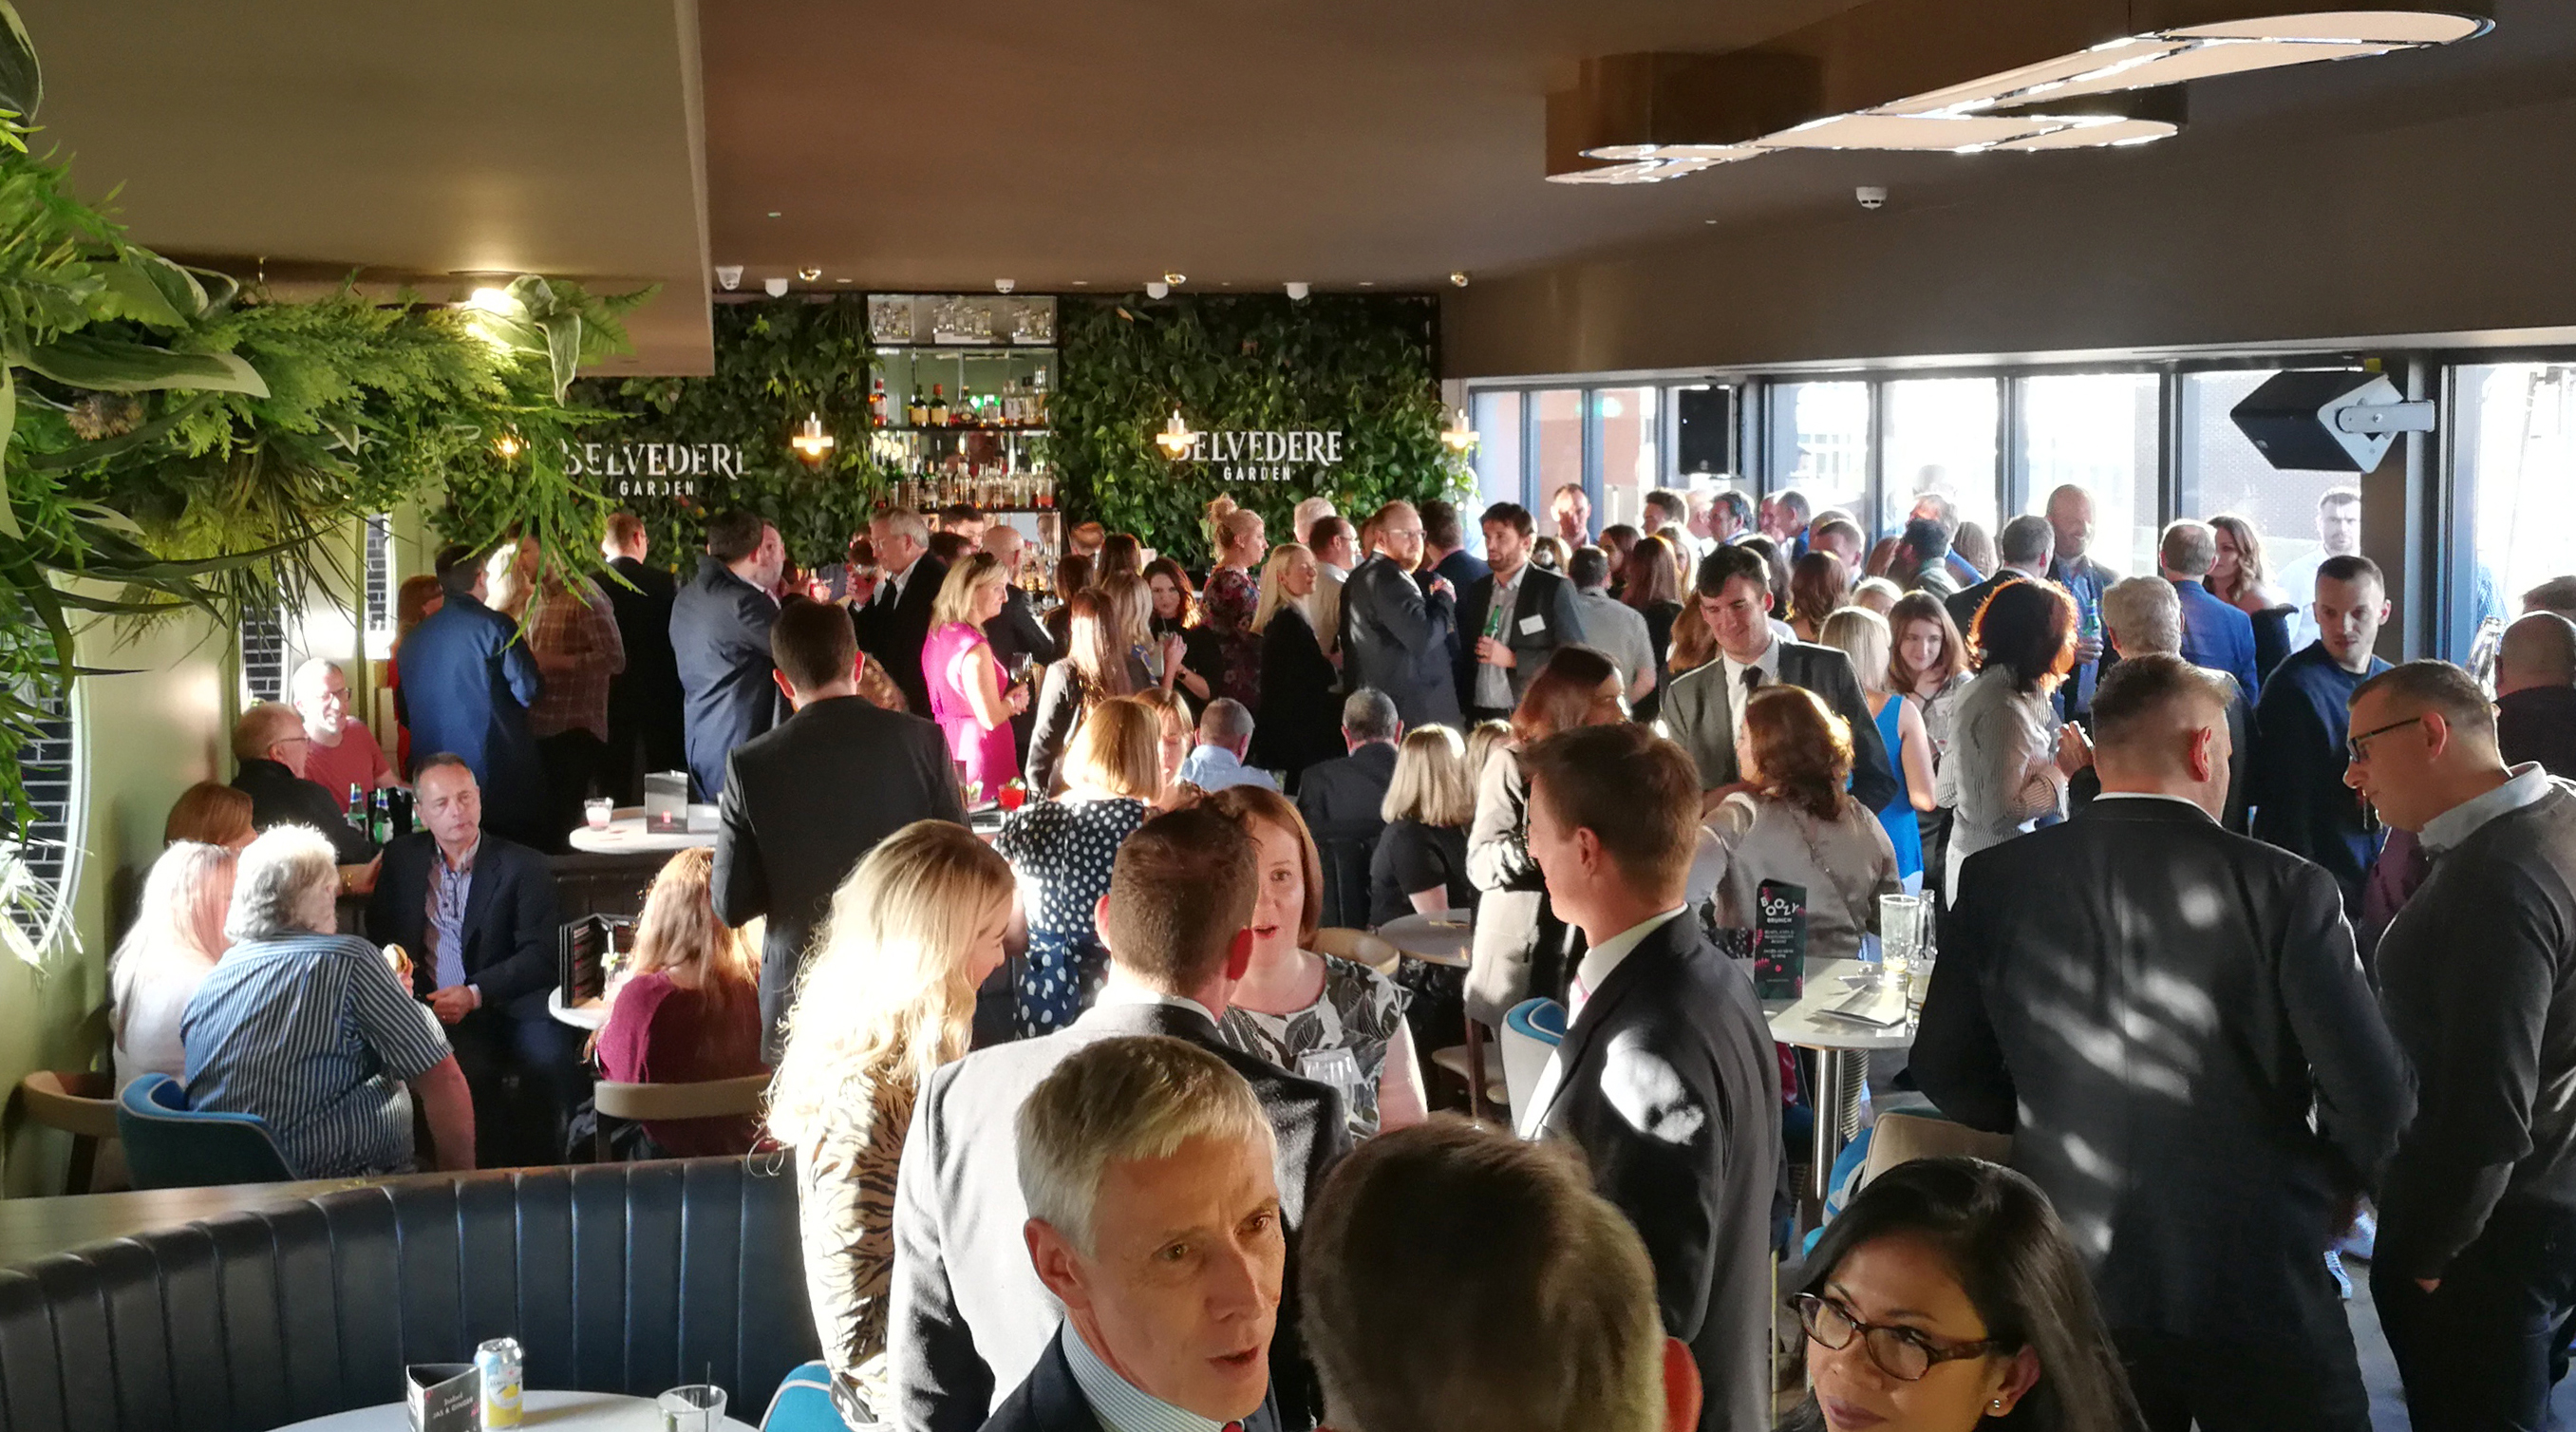 NI: MKB Law welcomes over 200 guests to end of summer rooftop party